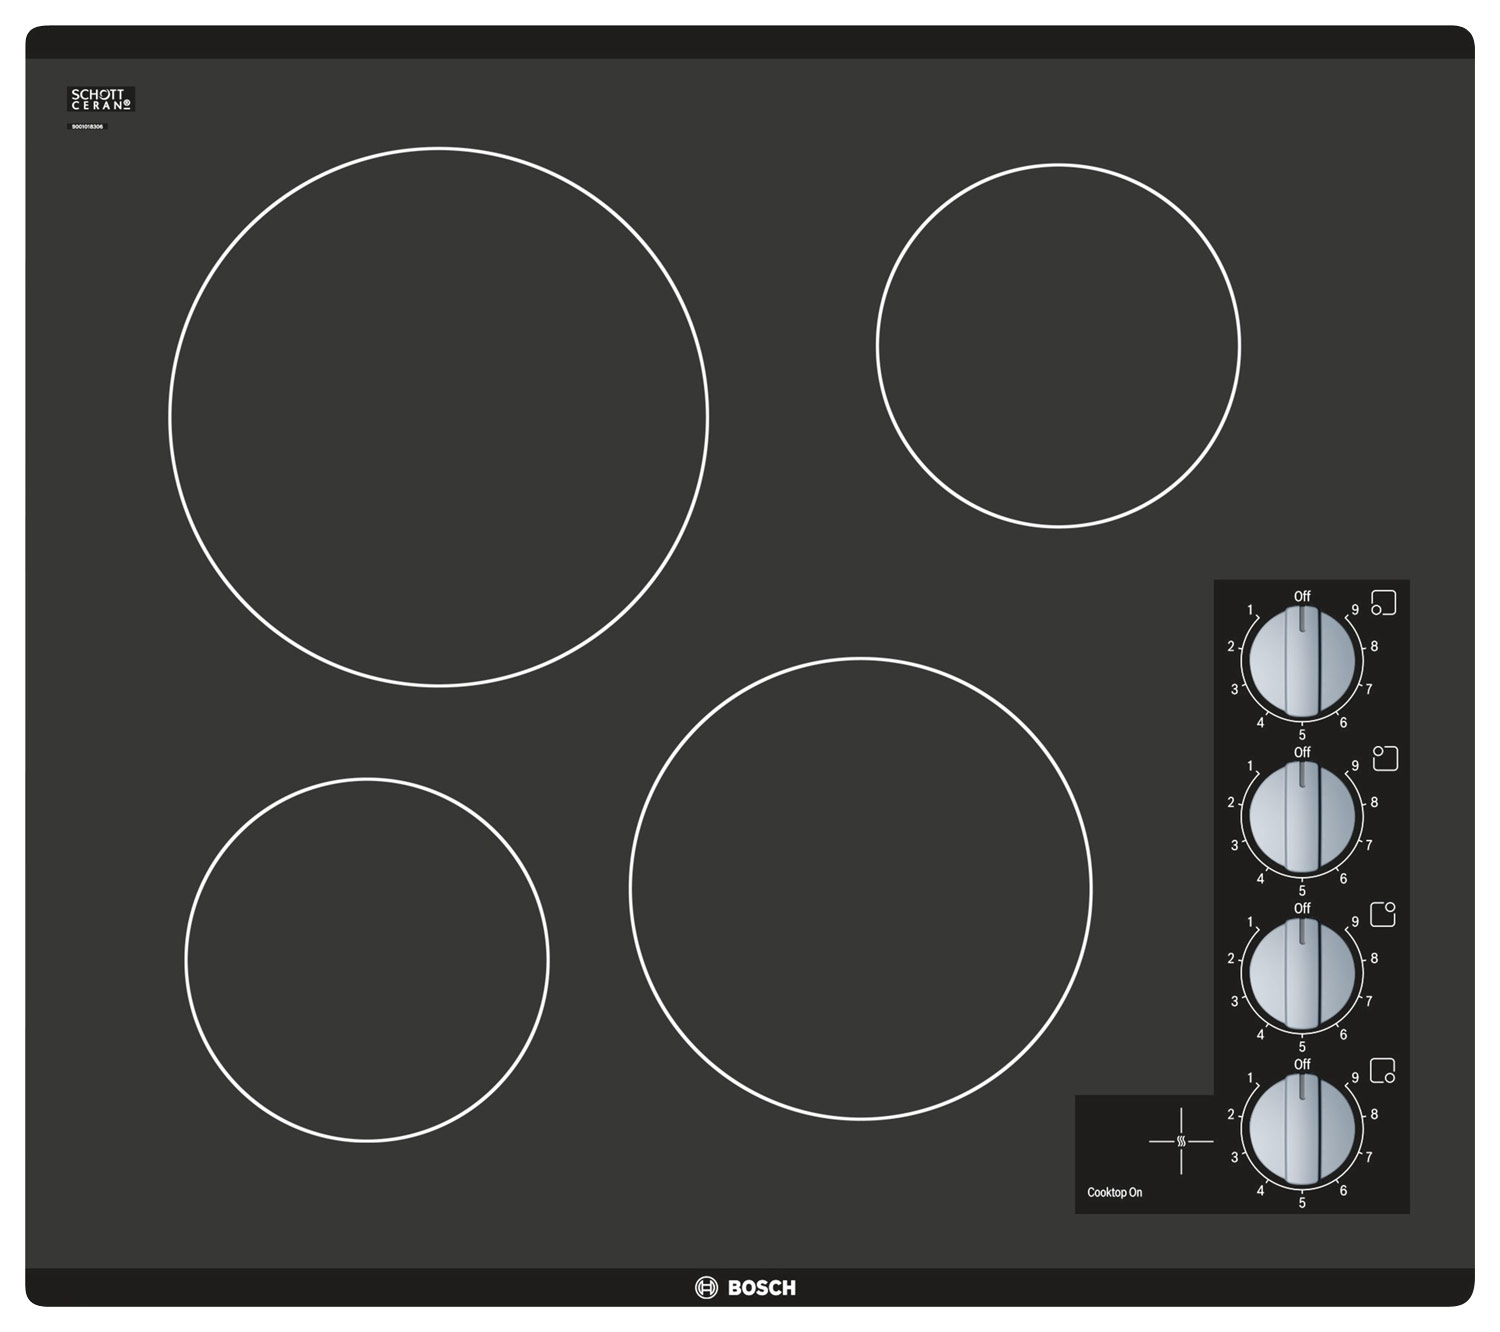 Bosch - 500 Series 24" Built-In Electric Cooktop with 4 elements - Black